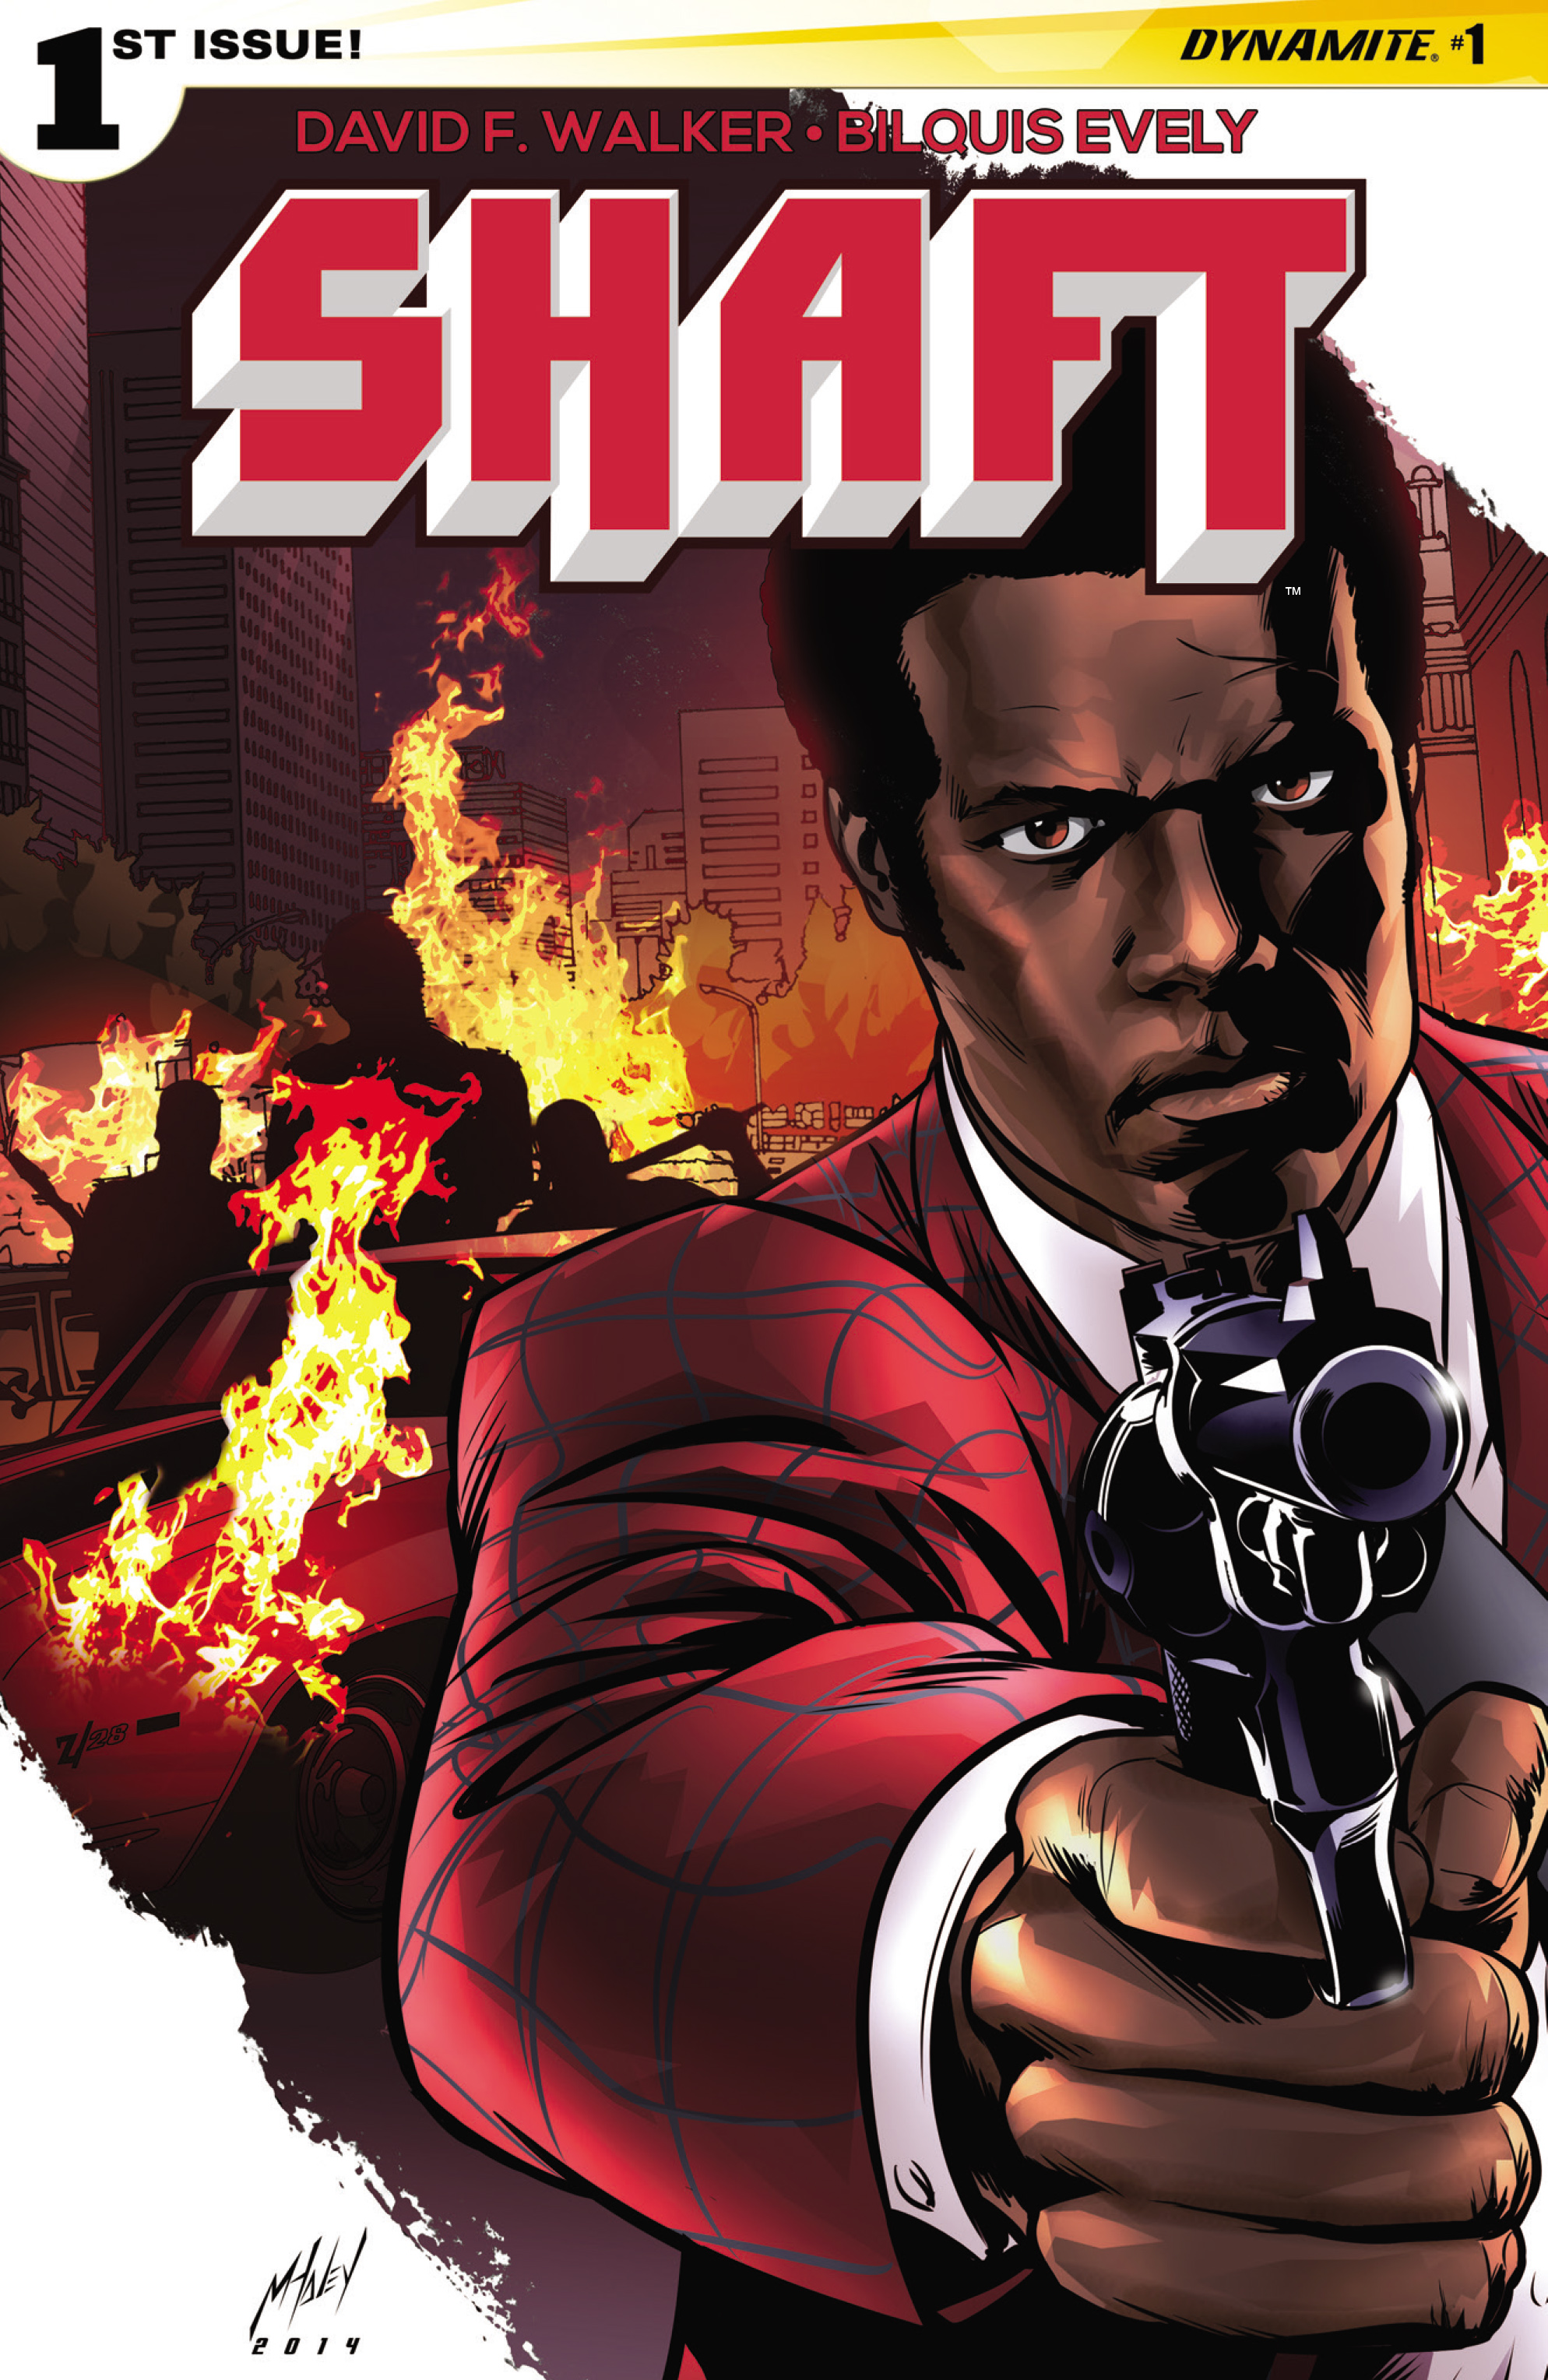 Read online Shaft comic -  Issue #1 - 5